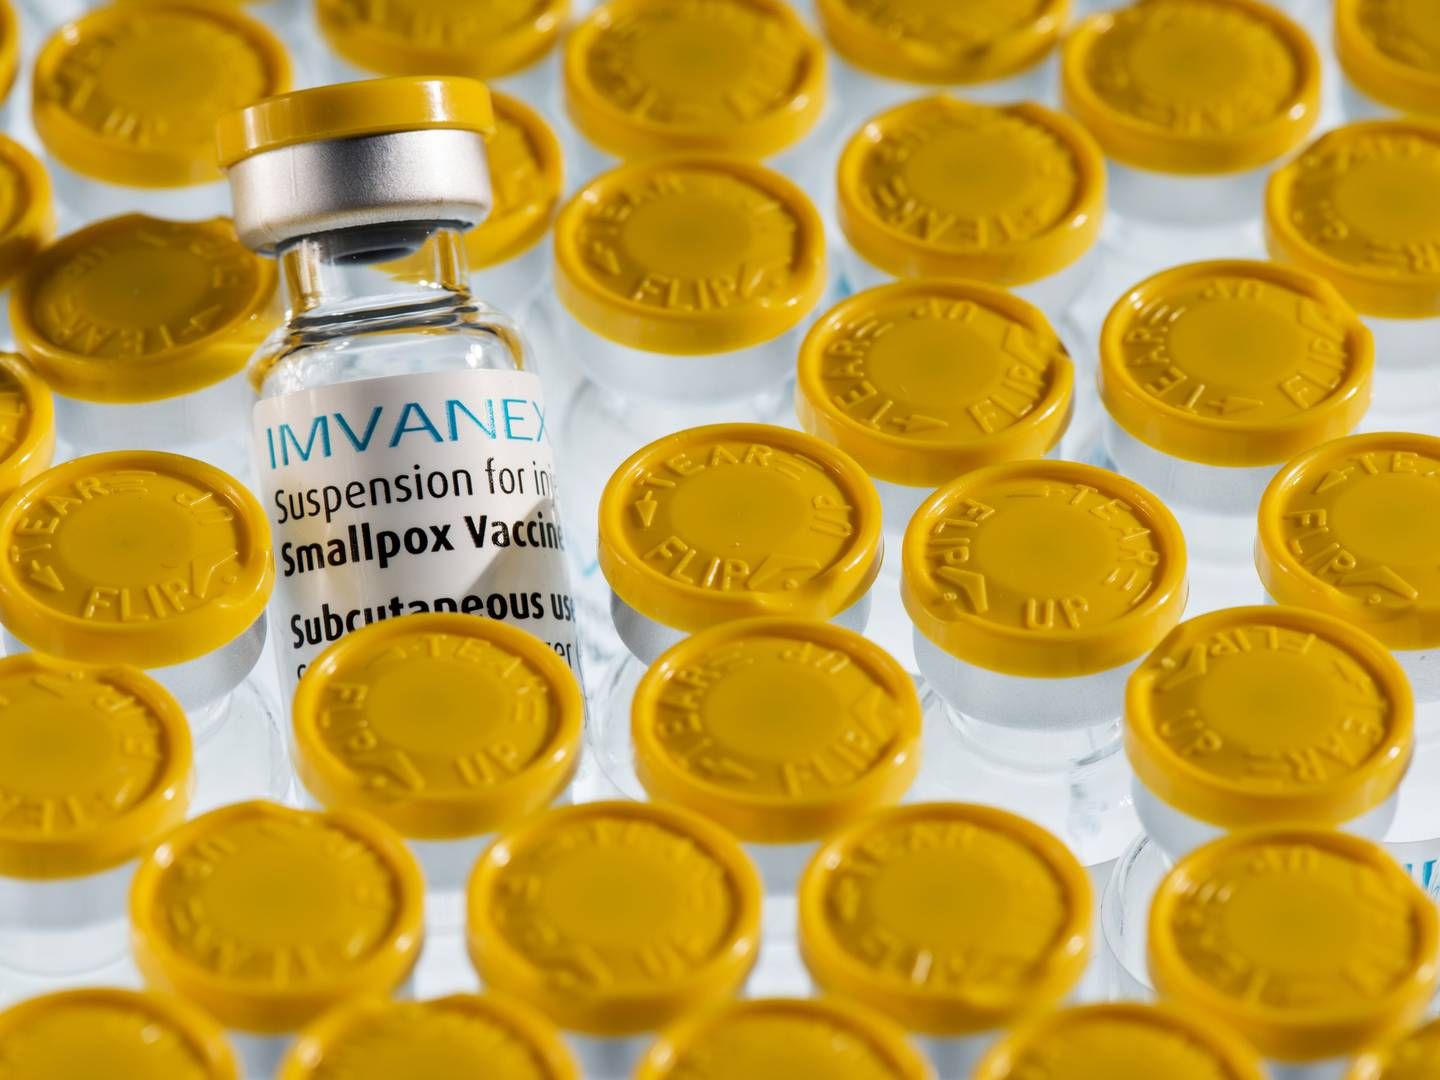 Bavarian Nordic's vaccine requires two shots to be fully effective but local health officials in the US are limiting the regimen to one, to get as many shots in arms as possible | Photo: Bavarian Nordic / PR